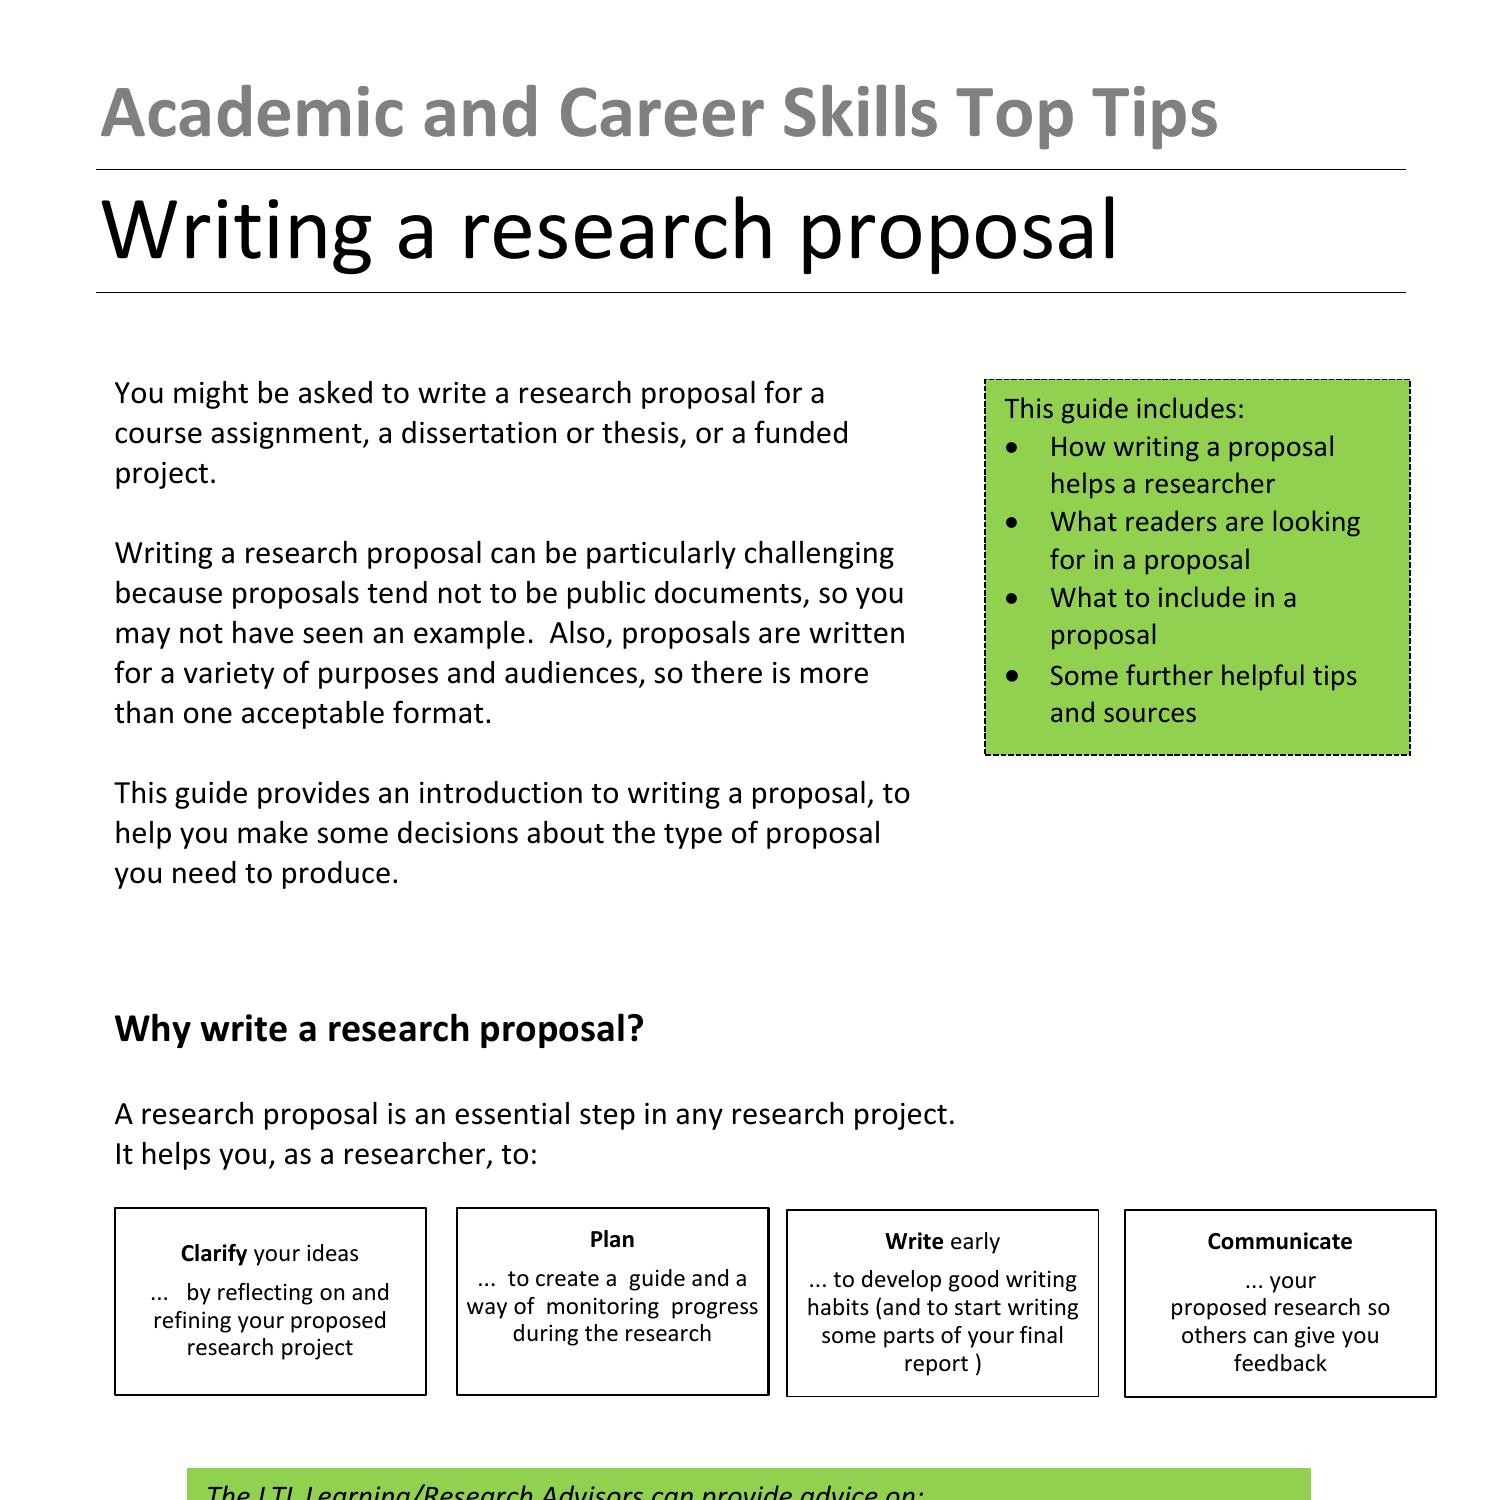 steps in research proposal writing pdf